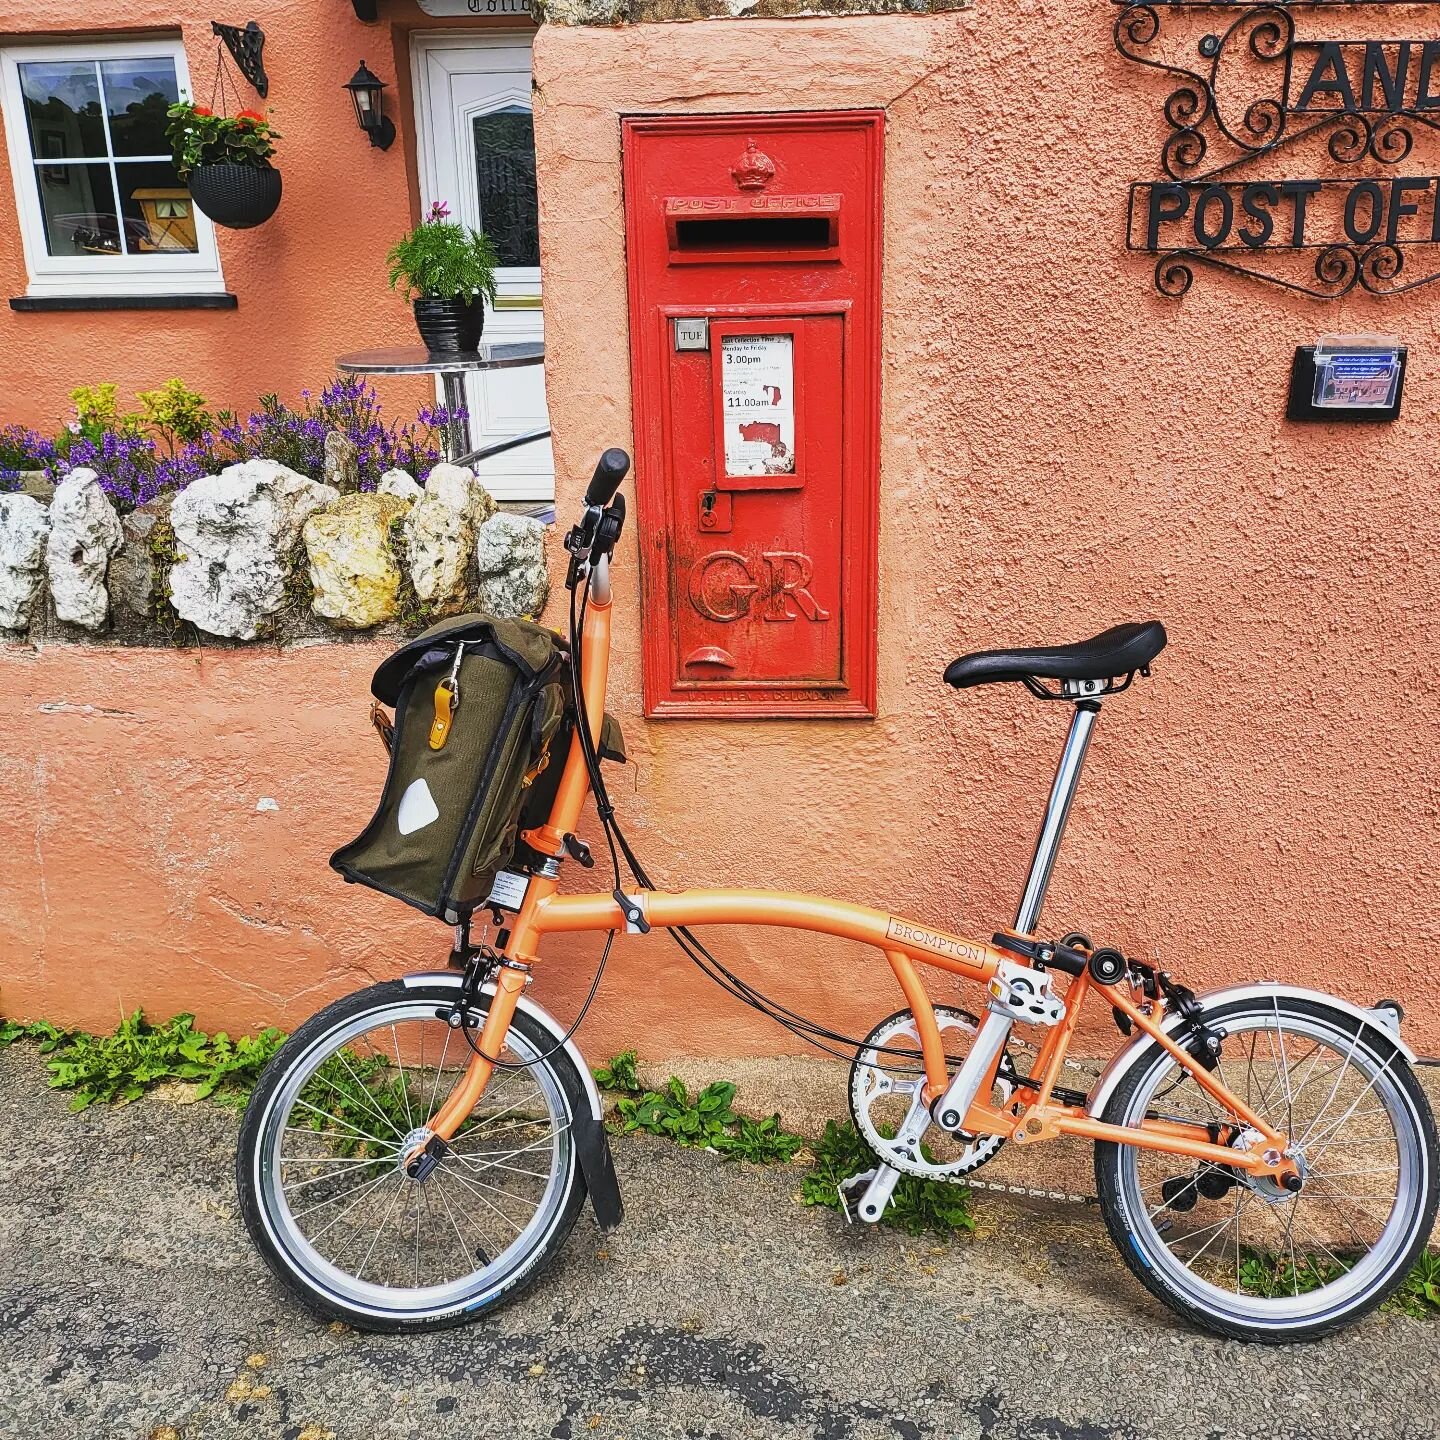 🌿 SUSTAINABILITY

All orders placed before 3pm are dispatched, First Class, the same day. This much-loved @bromptonbicycle is how 90% of those orders get to the postbox. Today's drop involved a 600ft steep hill 😅

#sustainability is important to us